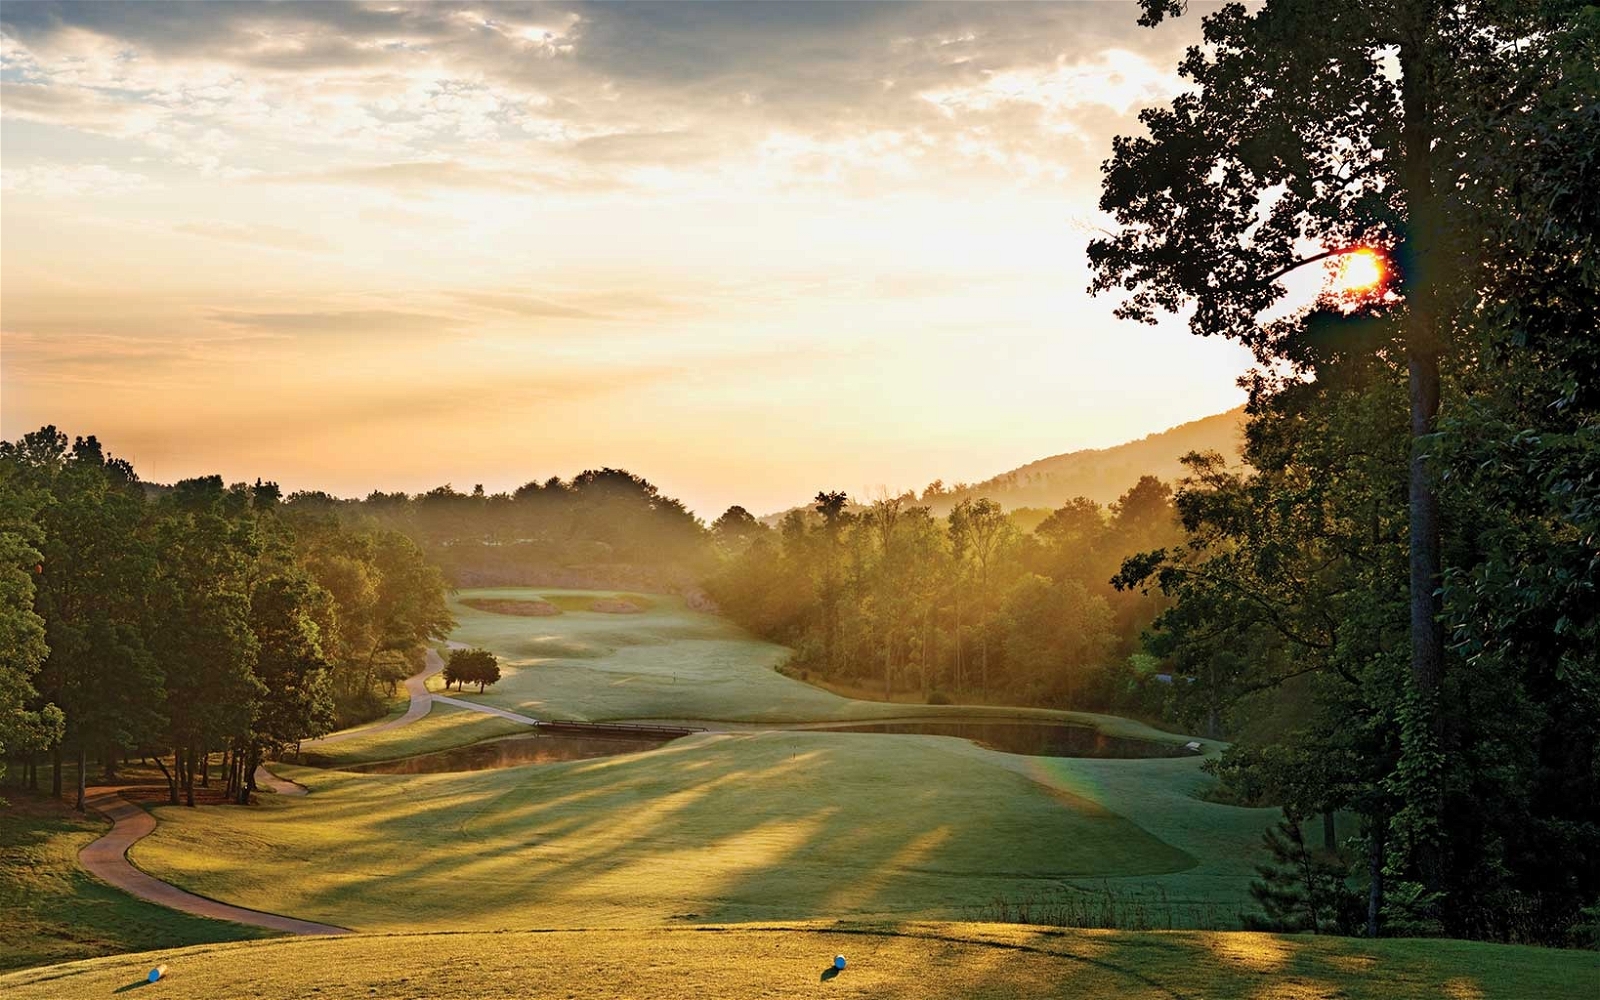 Golf Vacation Package - Oxmoor Valley - Ridge Course